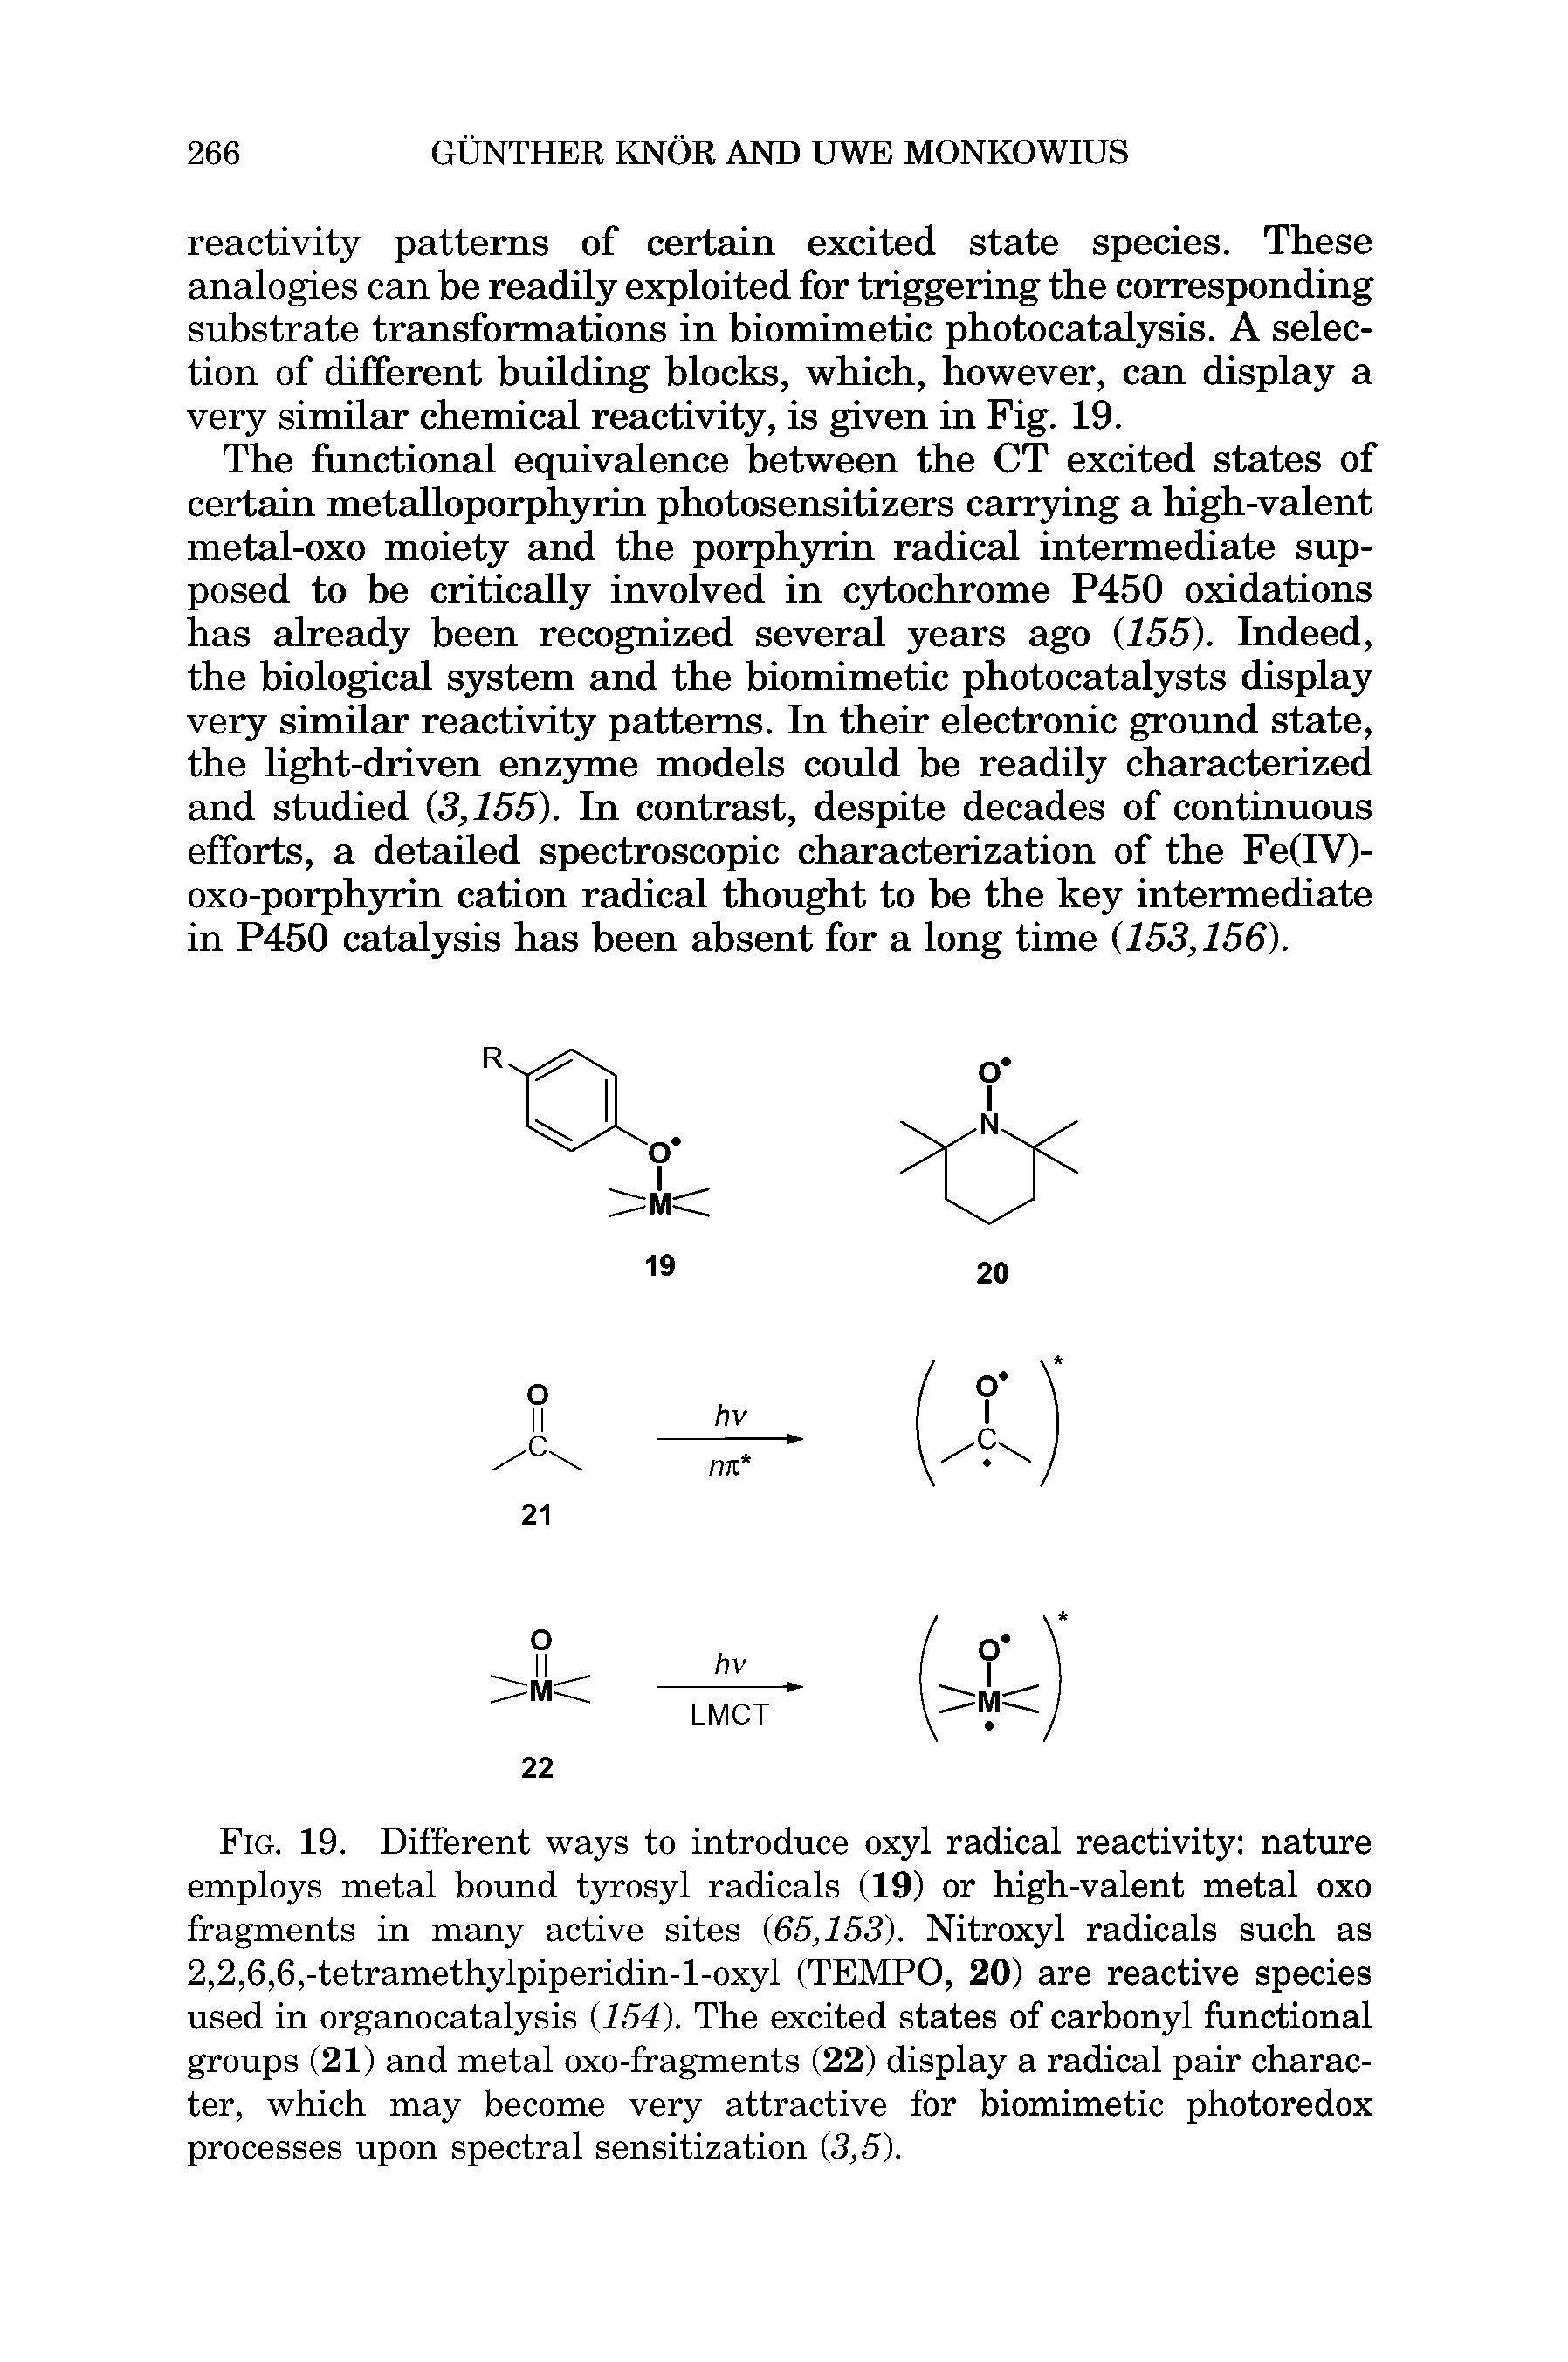 Fig. 19. Different ways to introduce oxyl radical reactivity nature employs metal bound tyrosyl radicals (19) or high-valent metal oxo fragments in many active sites (65,153). Nitroxyl radicals such as 2,2,6,6,-tetramethylpiperidin-l-oxyl (TEMPO, 20) are reactive species used in organocatalysis (154). The excited states of carbonyl functional groups (21) and metal oxo-fragments (22) display a radical pair character, which may become very attractive for biomimetic photoredox processes upon spectral sensitization (3,5).